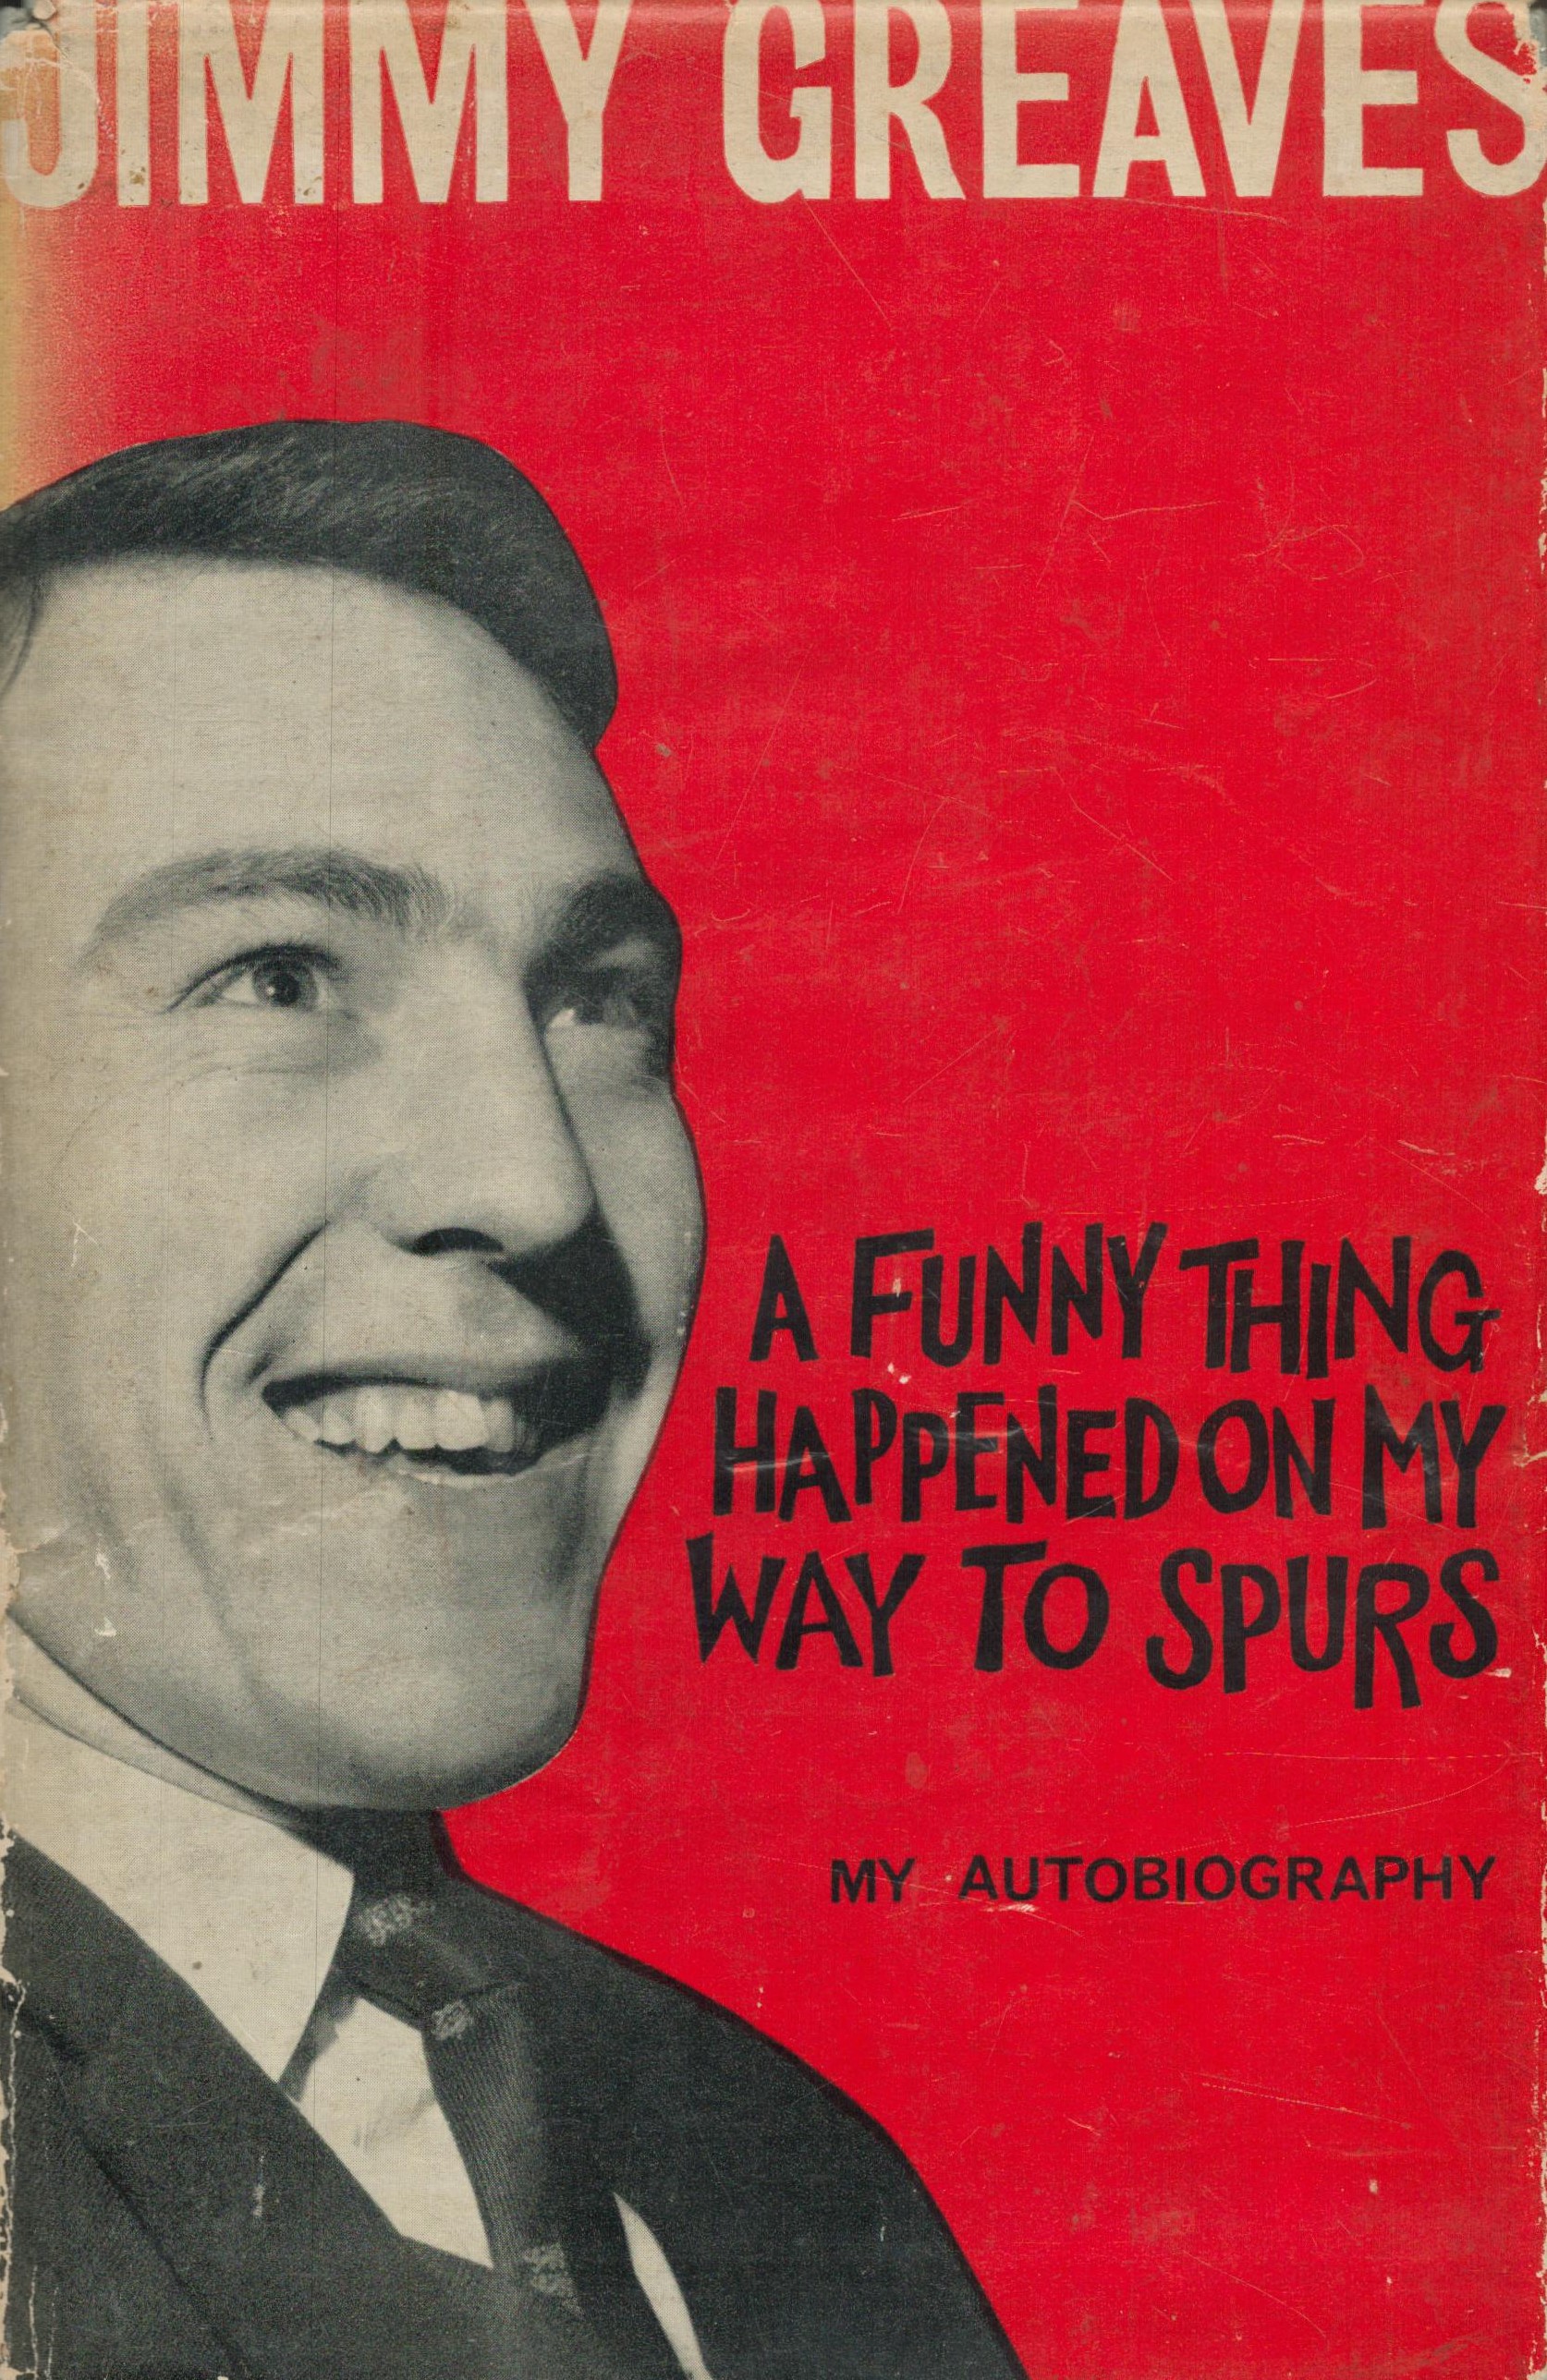 Jimmy Greaves signed first edition A Funny Thing Happened On My Way To Spurs hardback book. Good